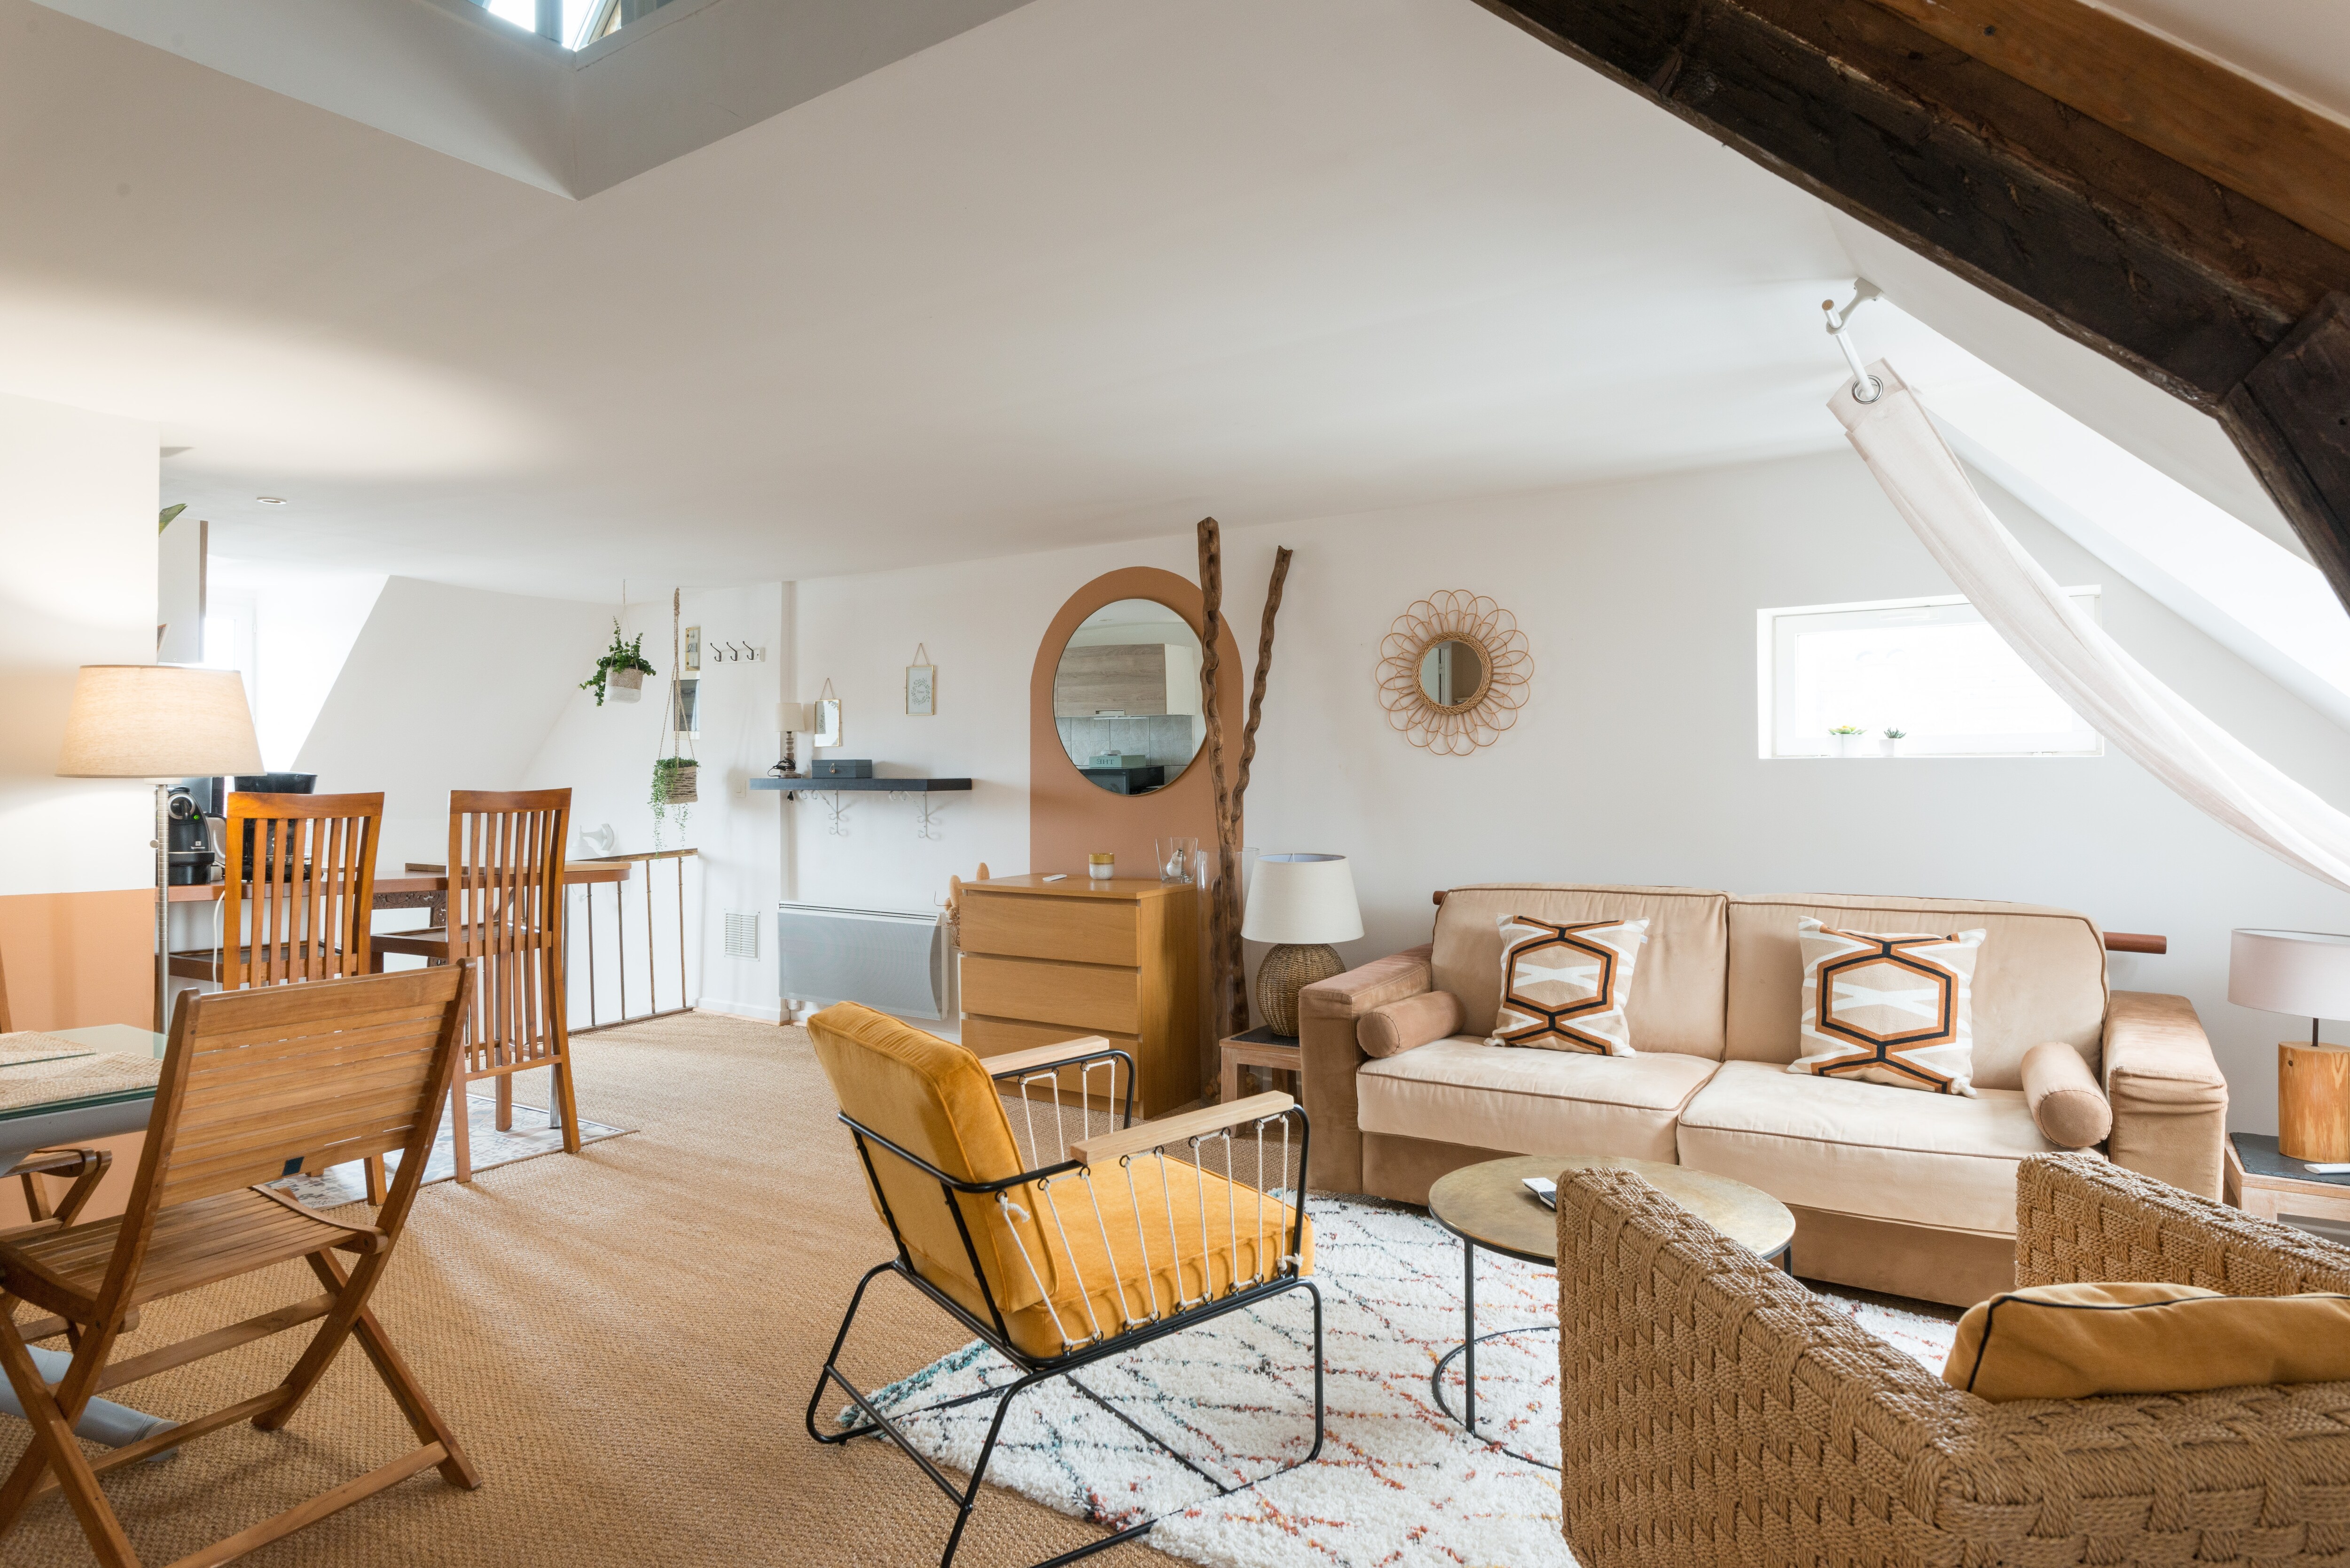 Property Image 2 - Charming duplex flat in the beautiful Norman town of Deauville